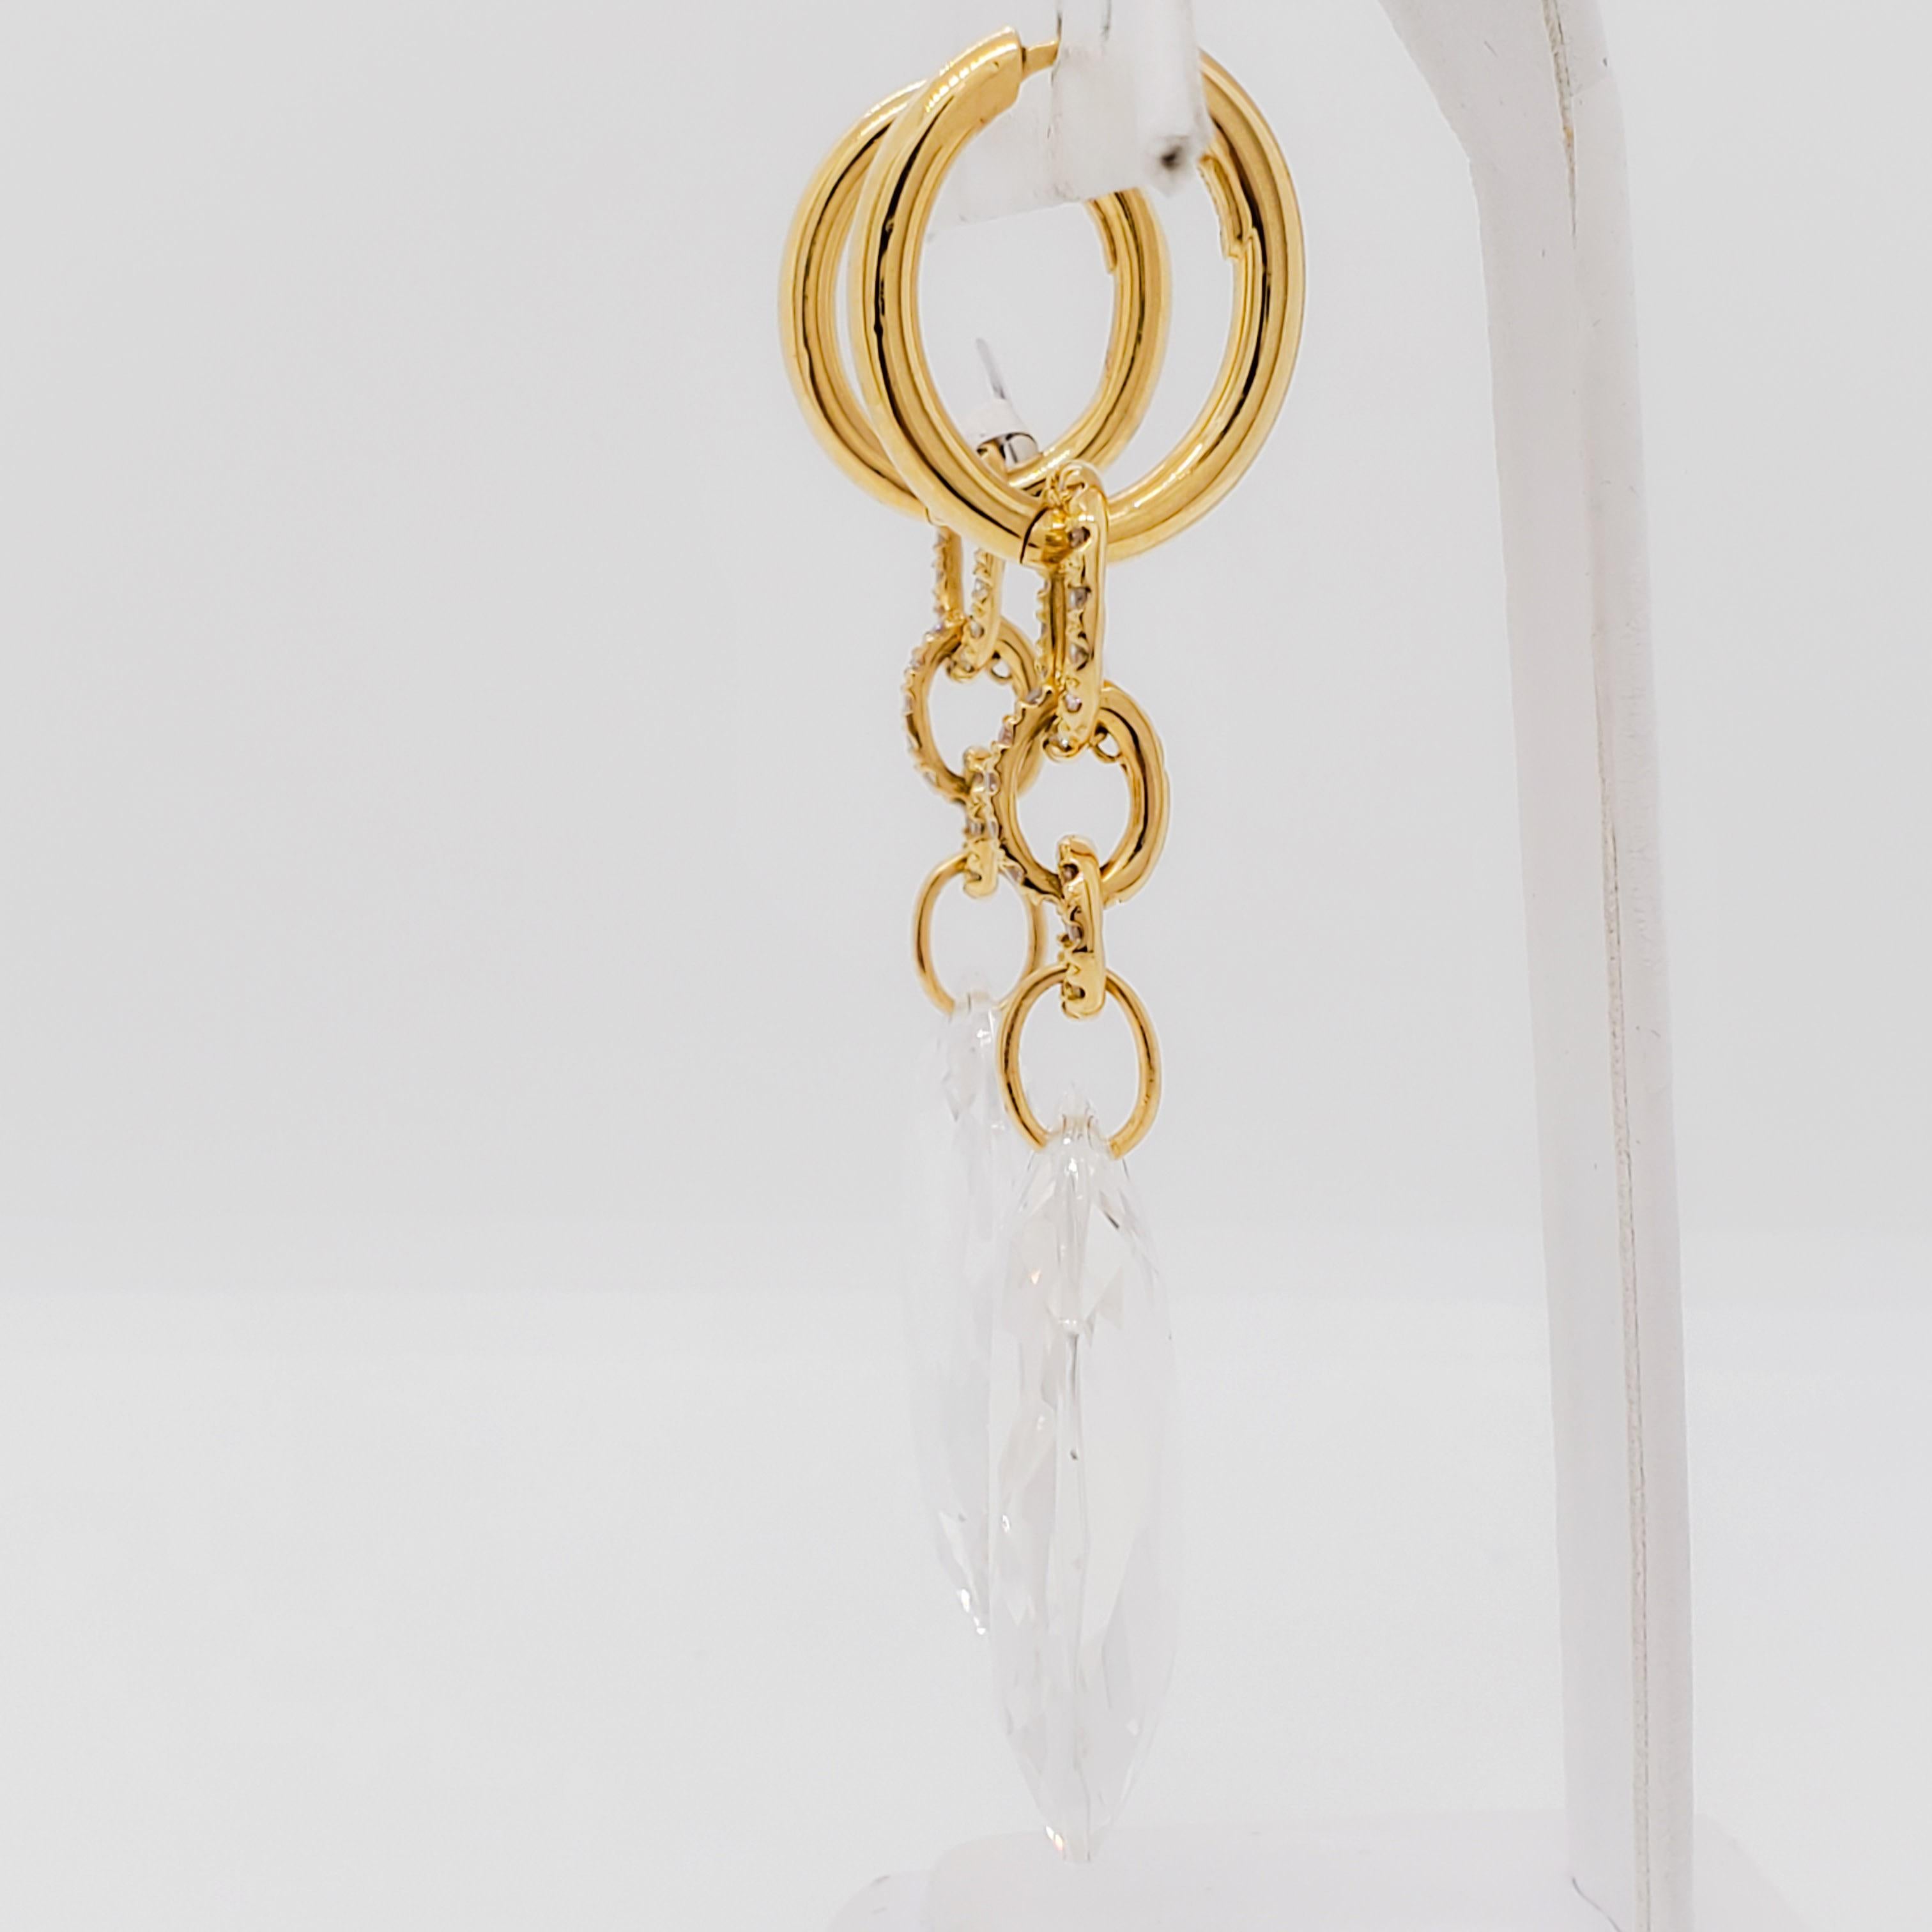 H. Stern and DVF Collaboration Dangle Earrings with Diamonds in 18k Yellow Gold 4